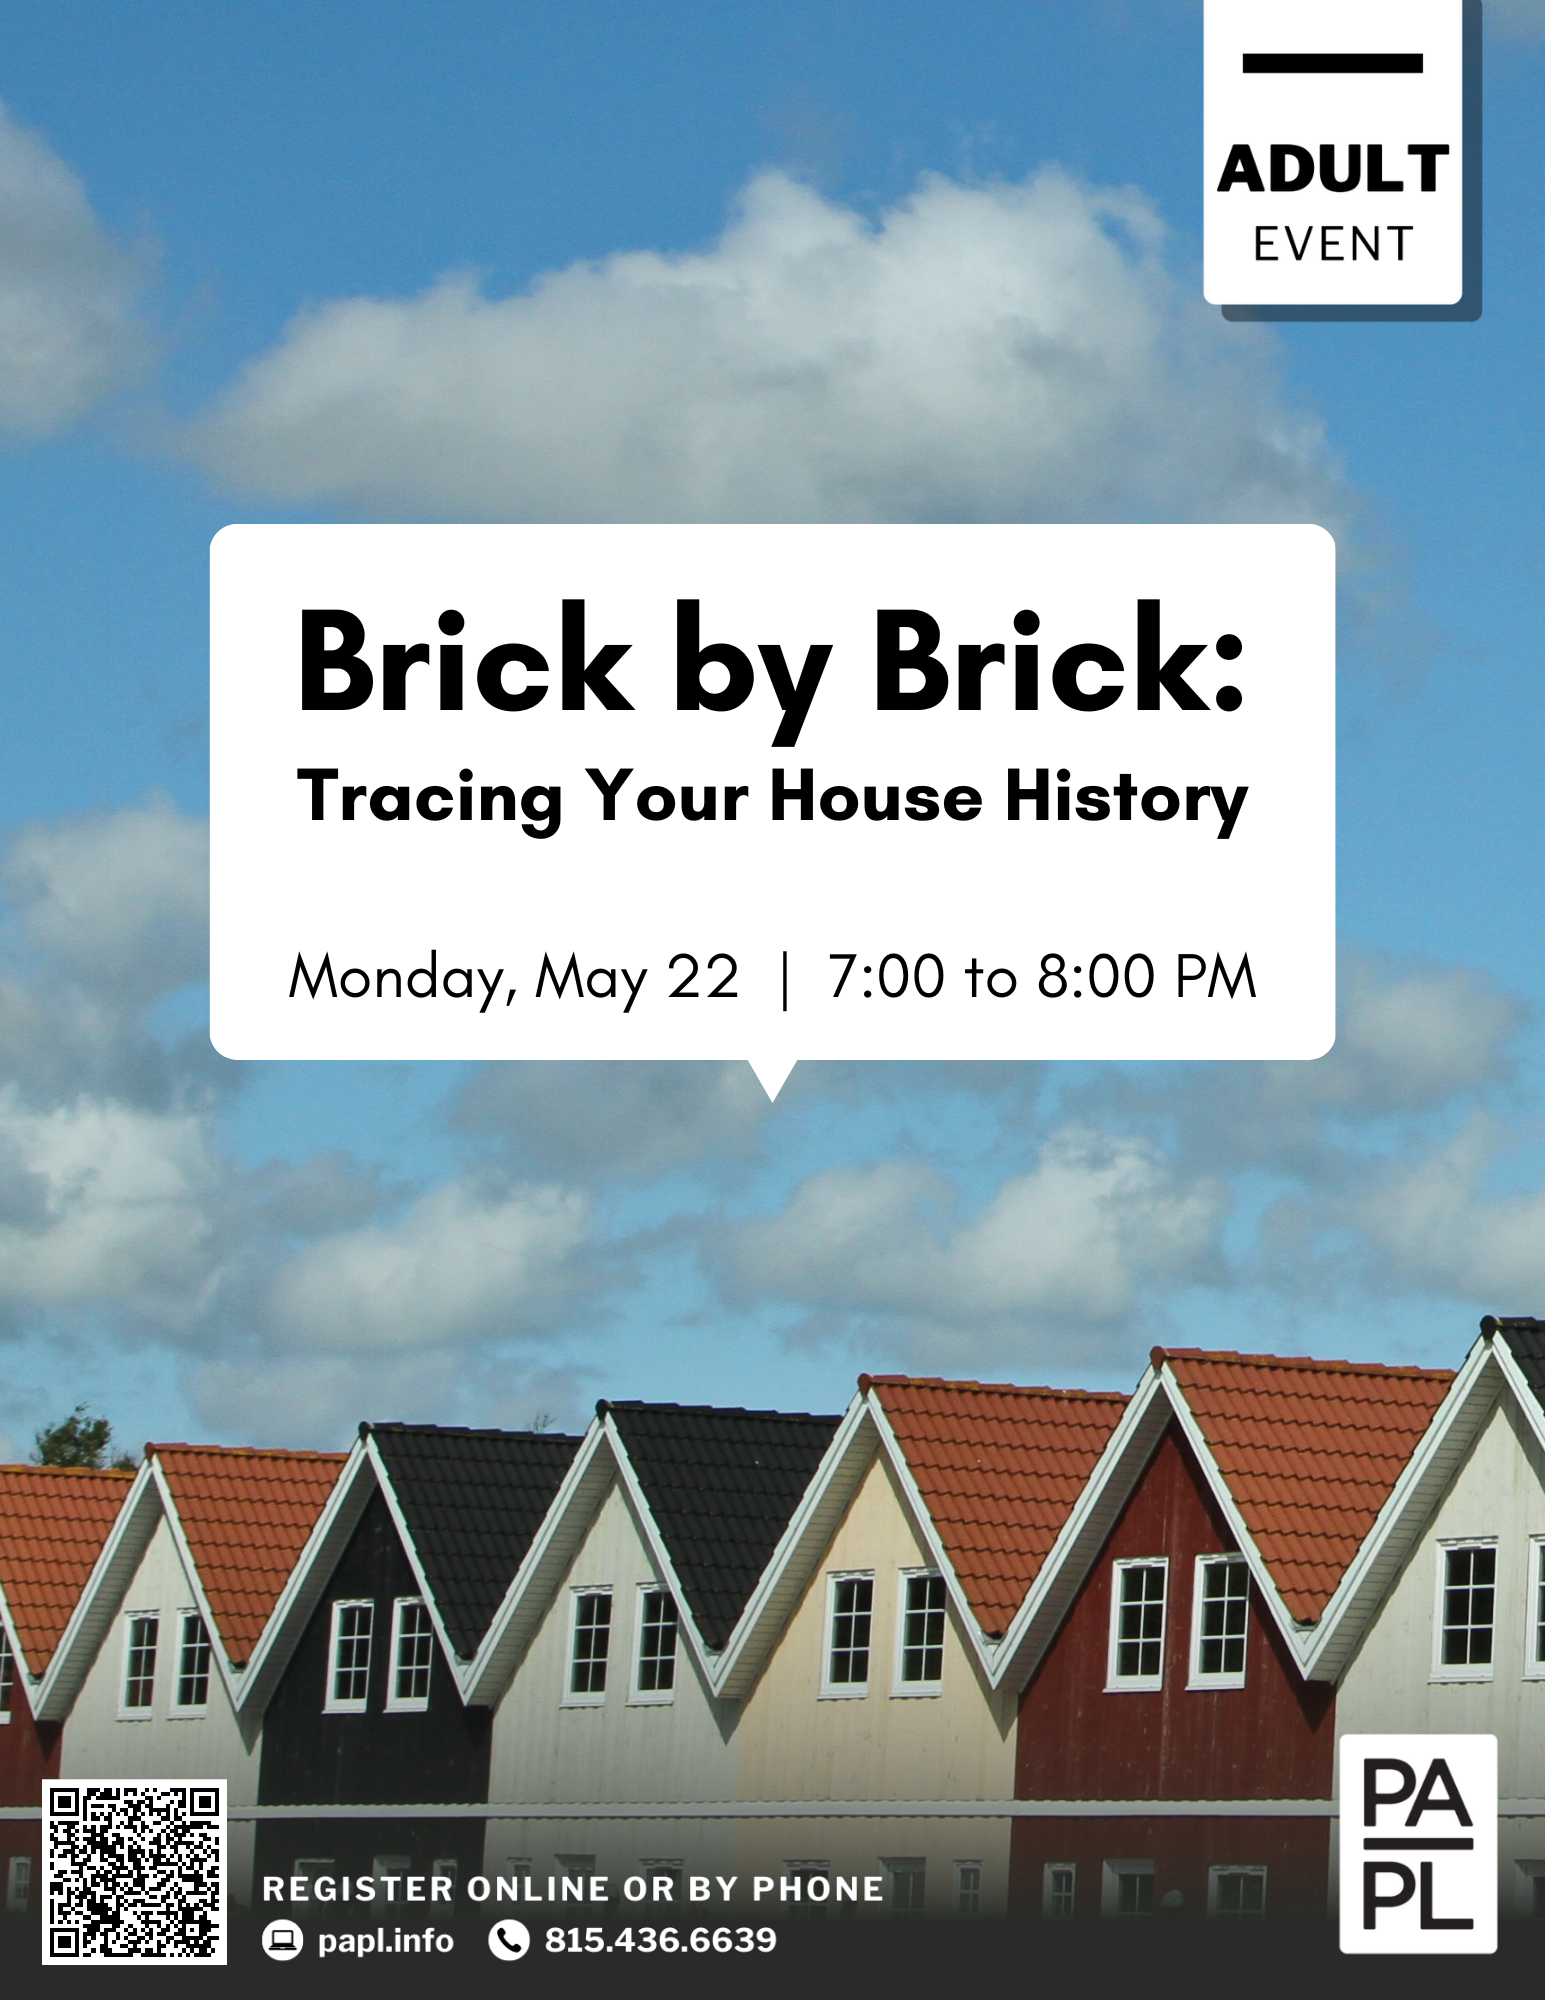 Brick by Brick: Tracing Your House History